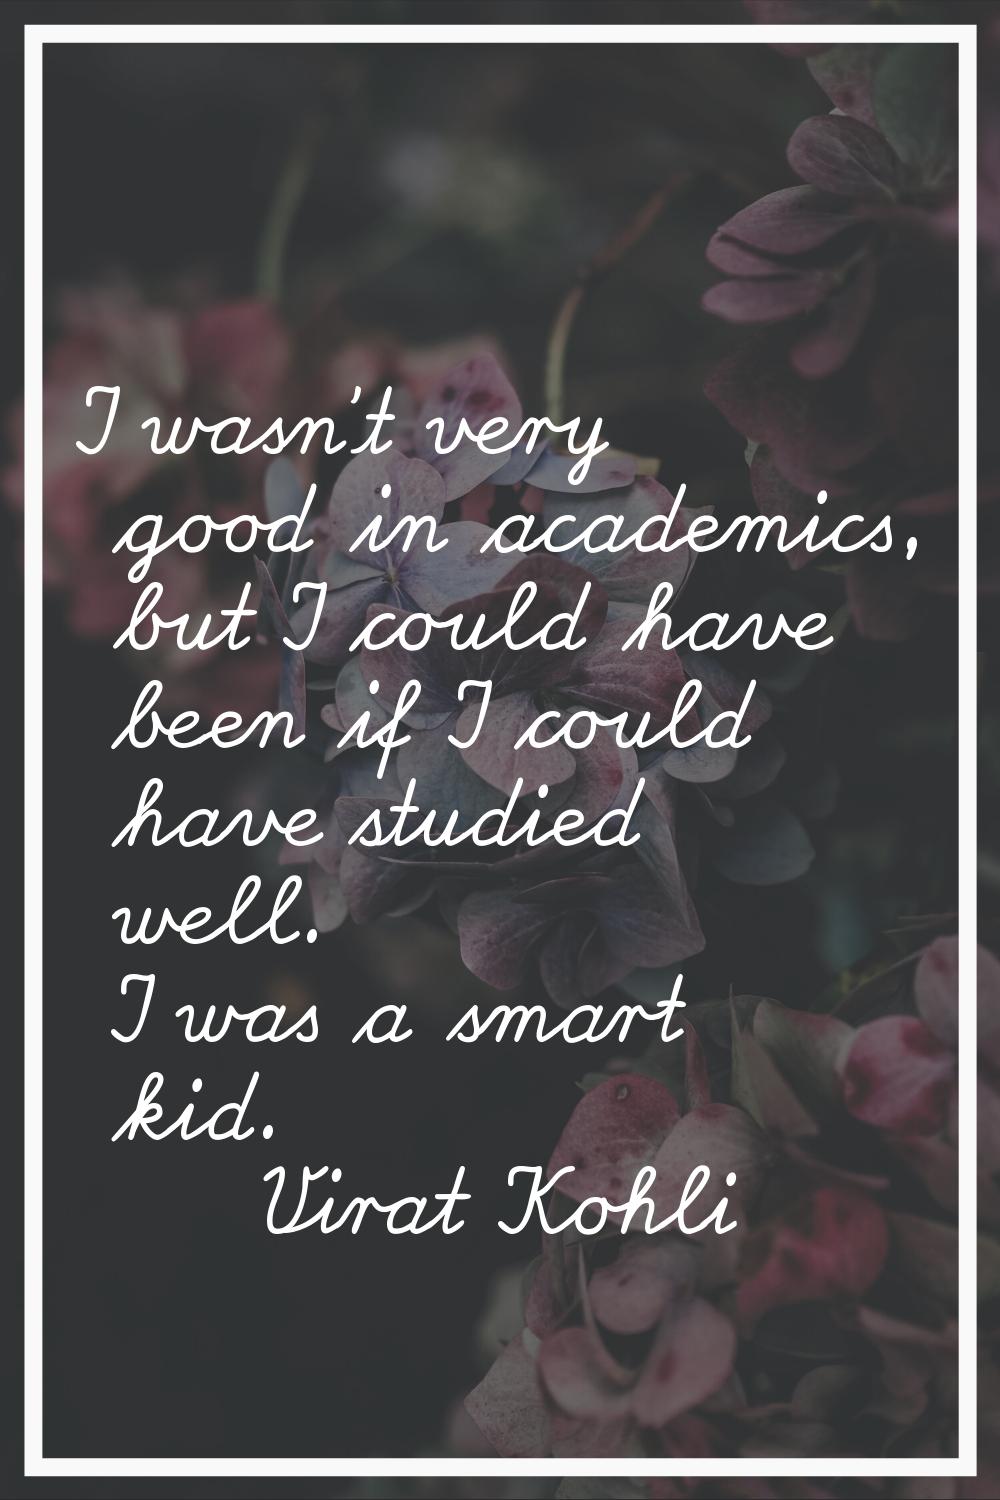 I wasn't very good in academics, but I could have been if I could have studied well. I was a smart 